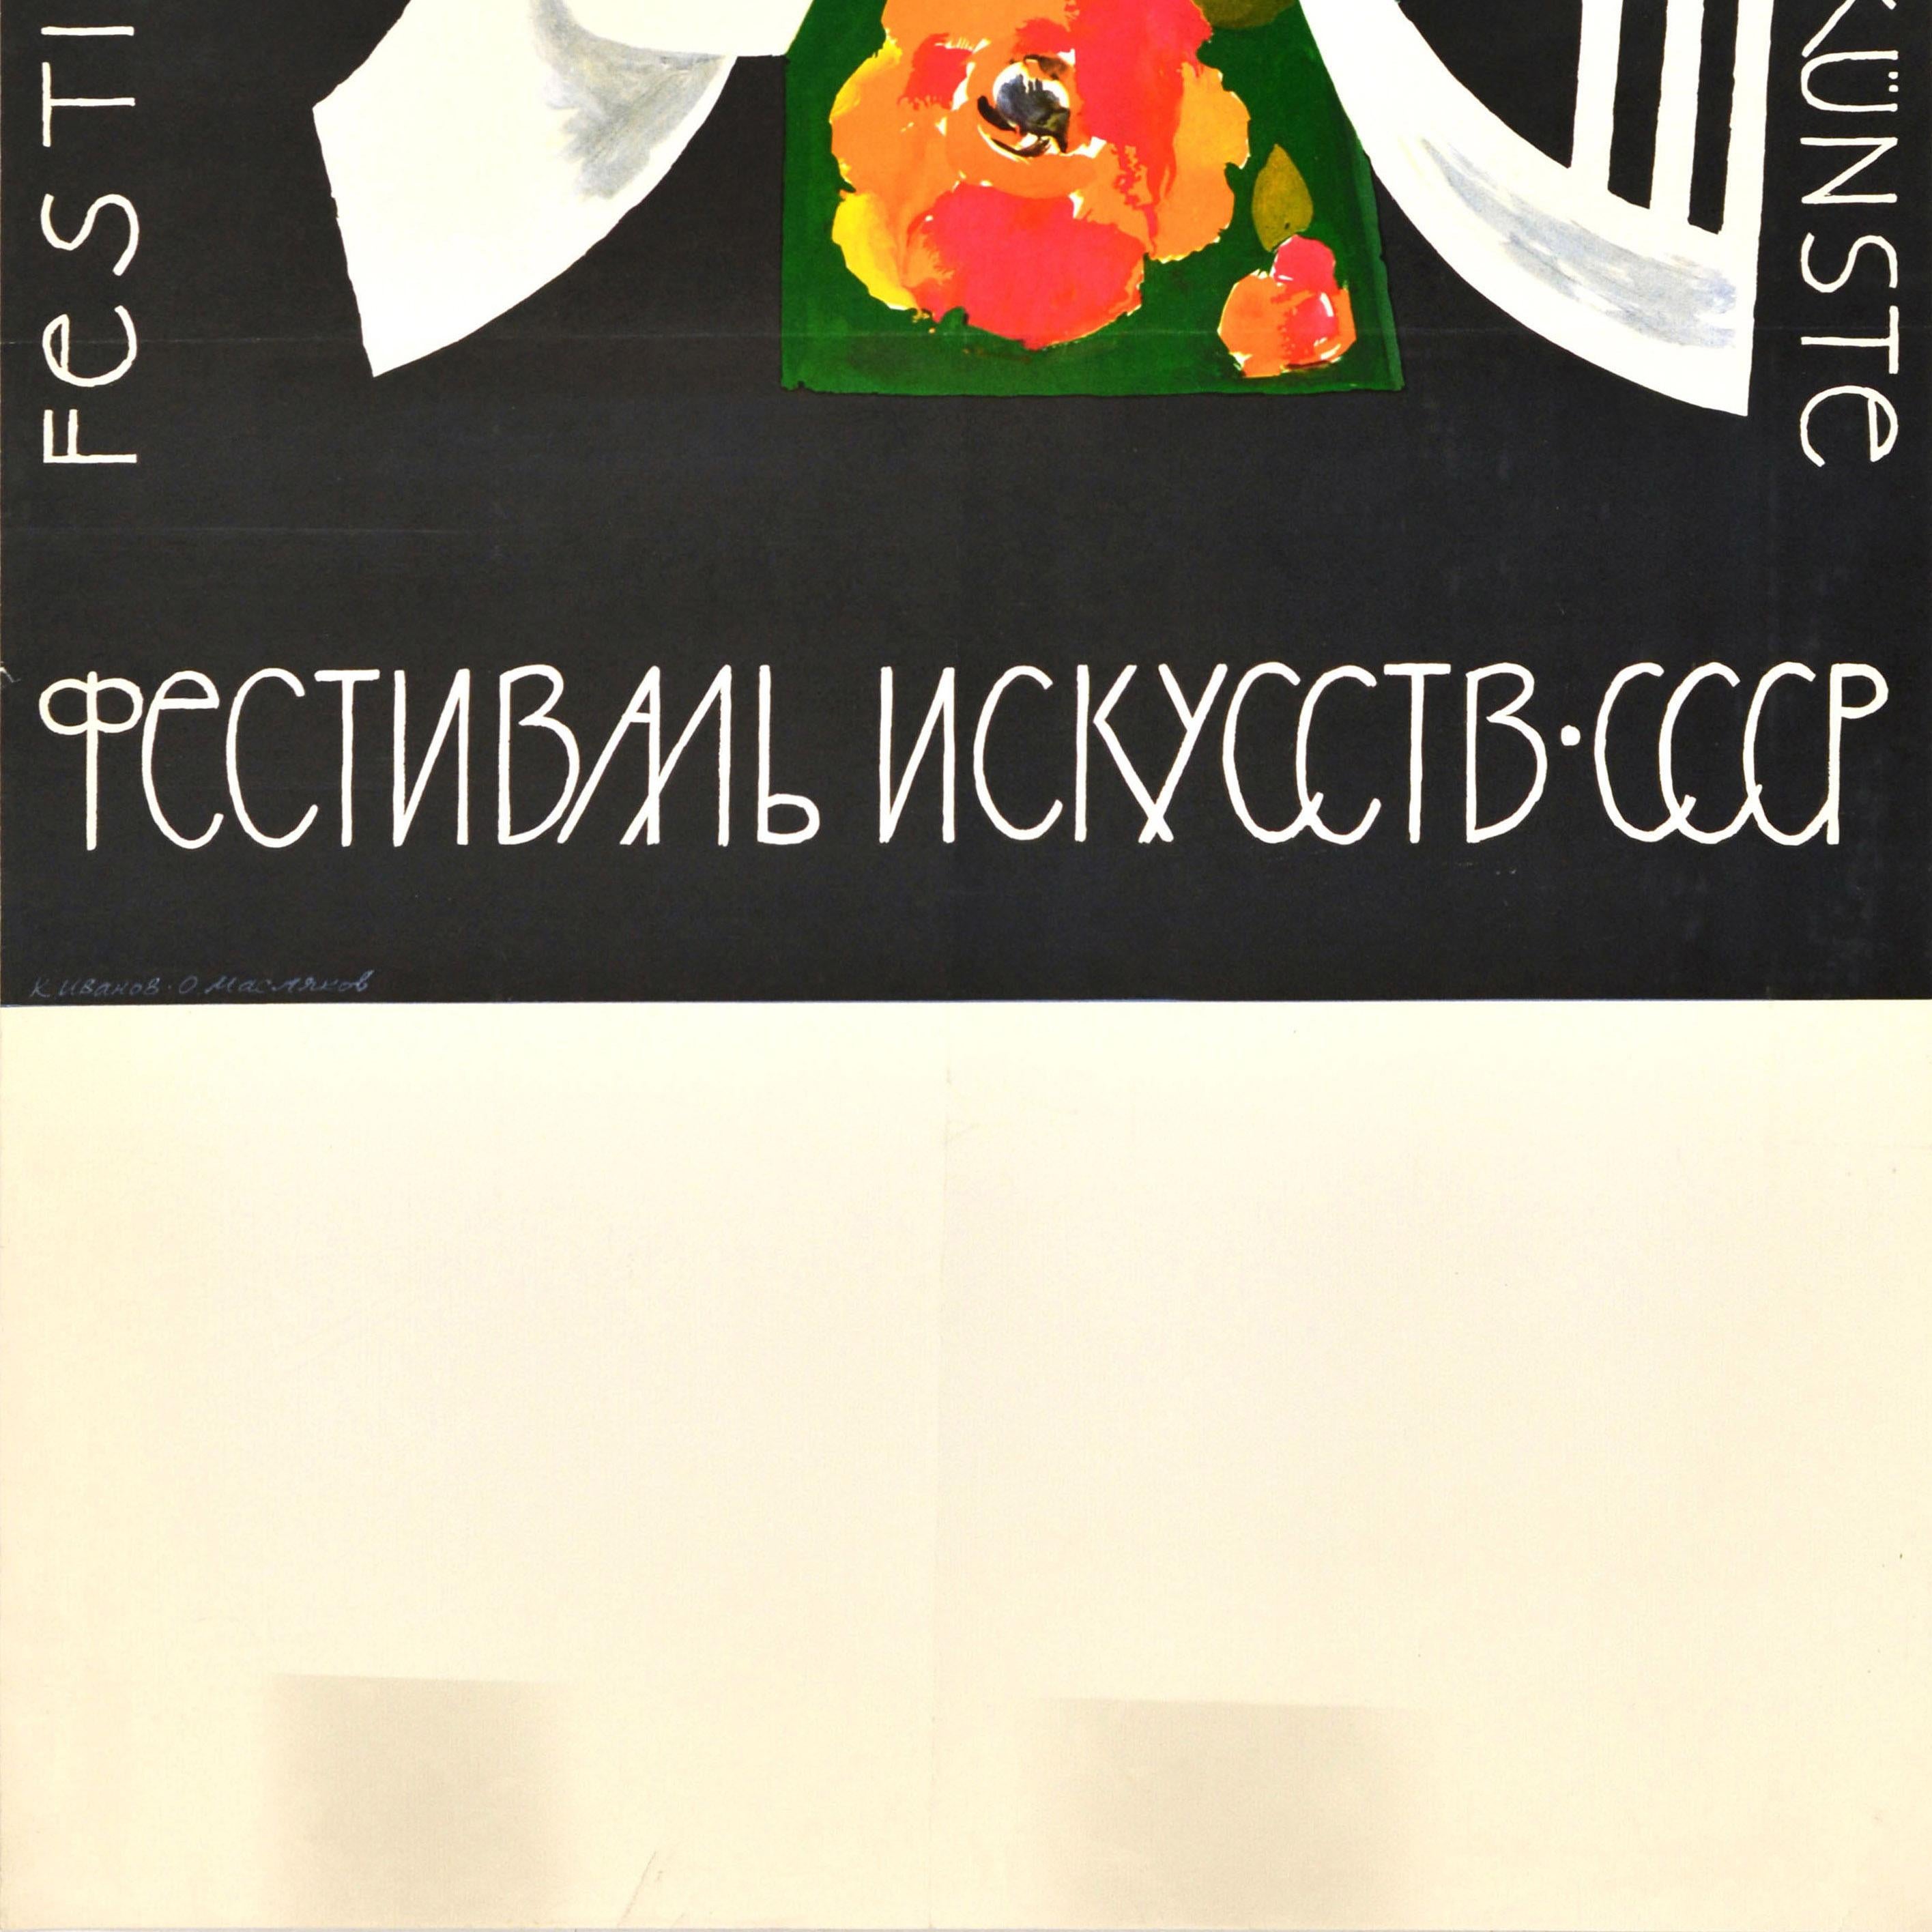 Original vintage Soviet advertising poster for the Festival of Arts Festival des Artes Festival der Kunste Фестиваль искусств CCCP USSR featuring the English, French, German and Russian text in white around a colourful image depicting a lady wearing